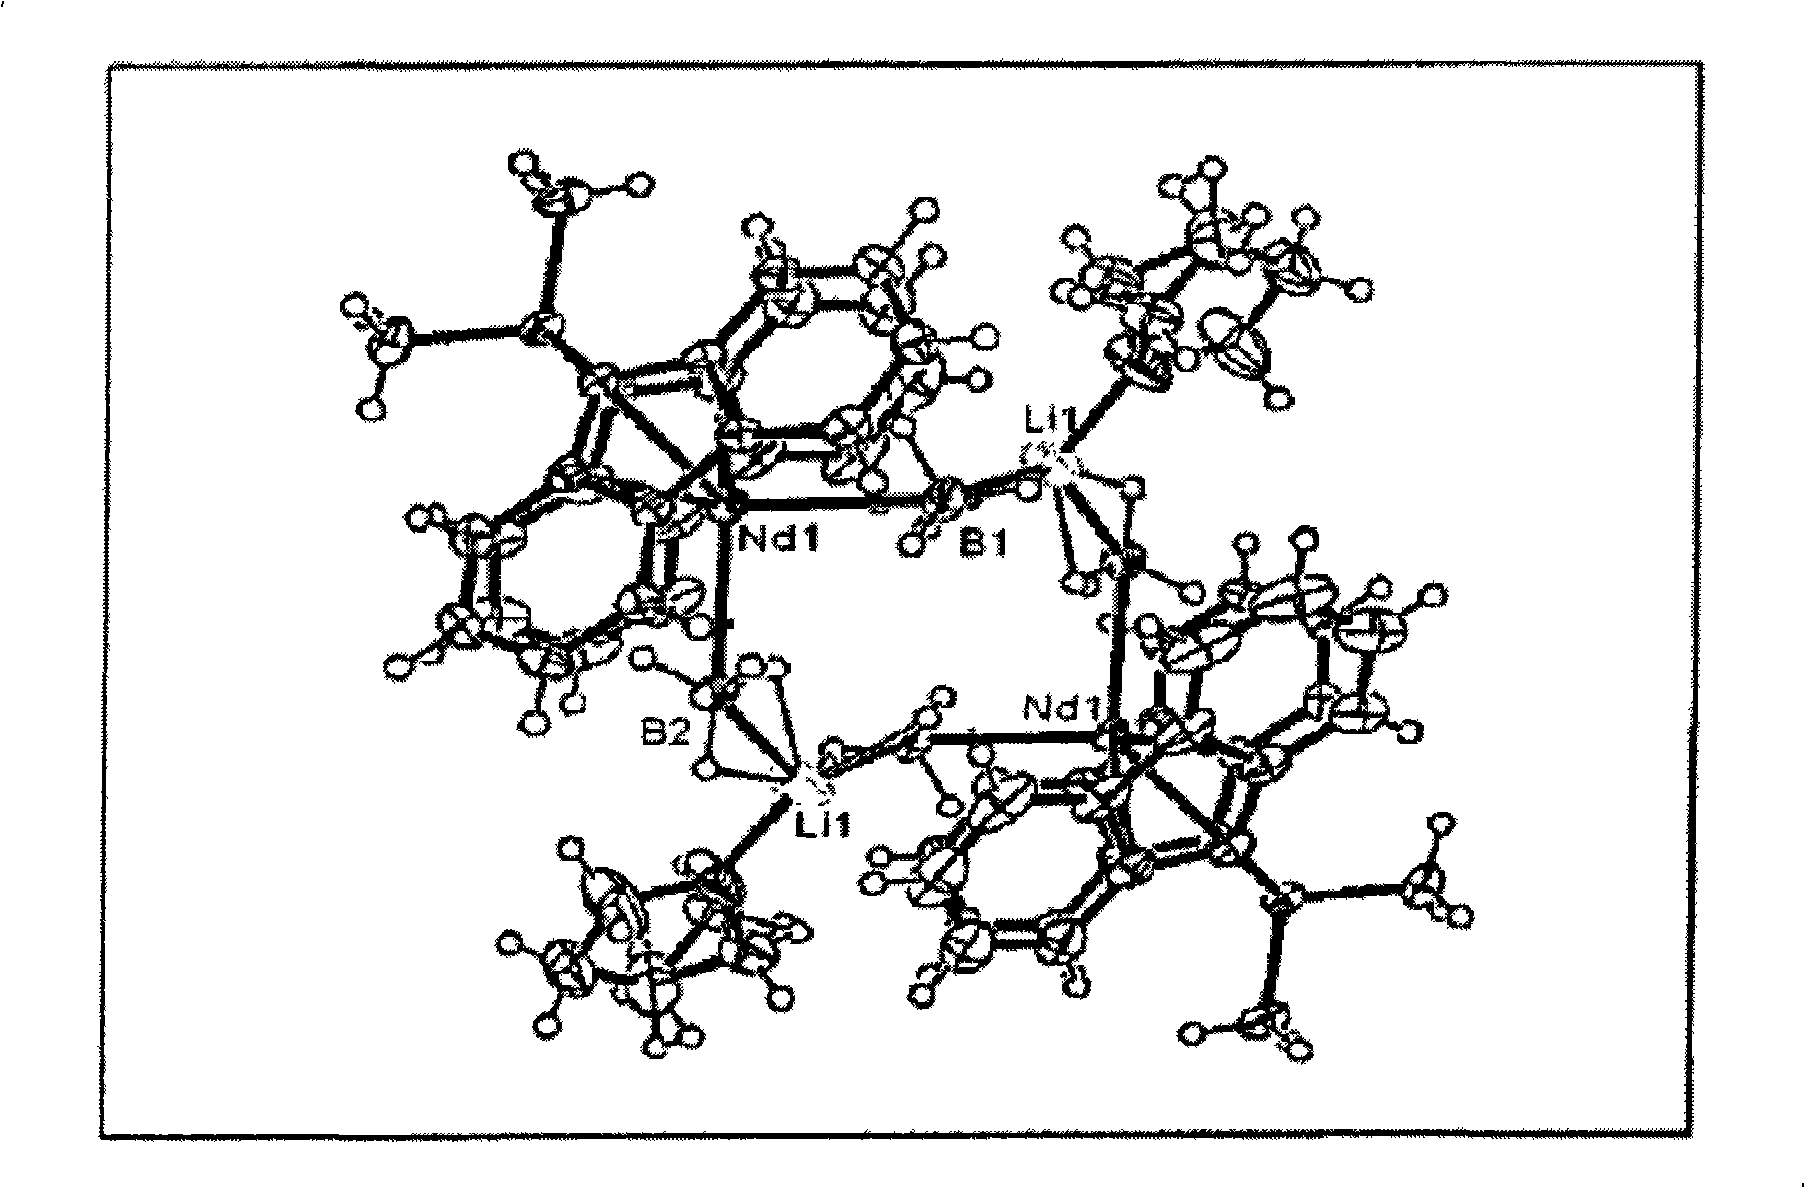 Borohydride metallocene complex of a lanthanide, catalytic system including said complex, polymerization method using same and ethylene/butadiene copolymer obtained using said method